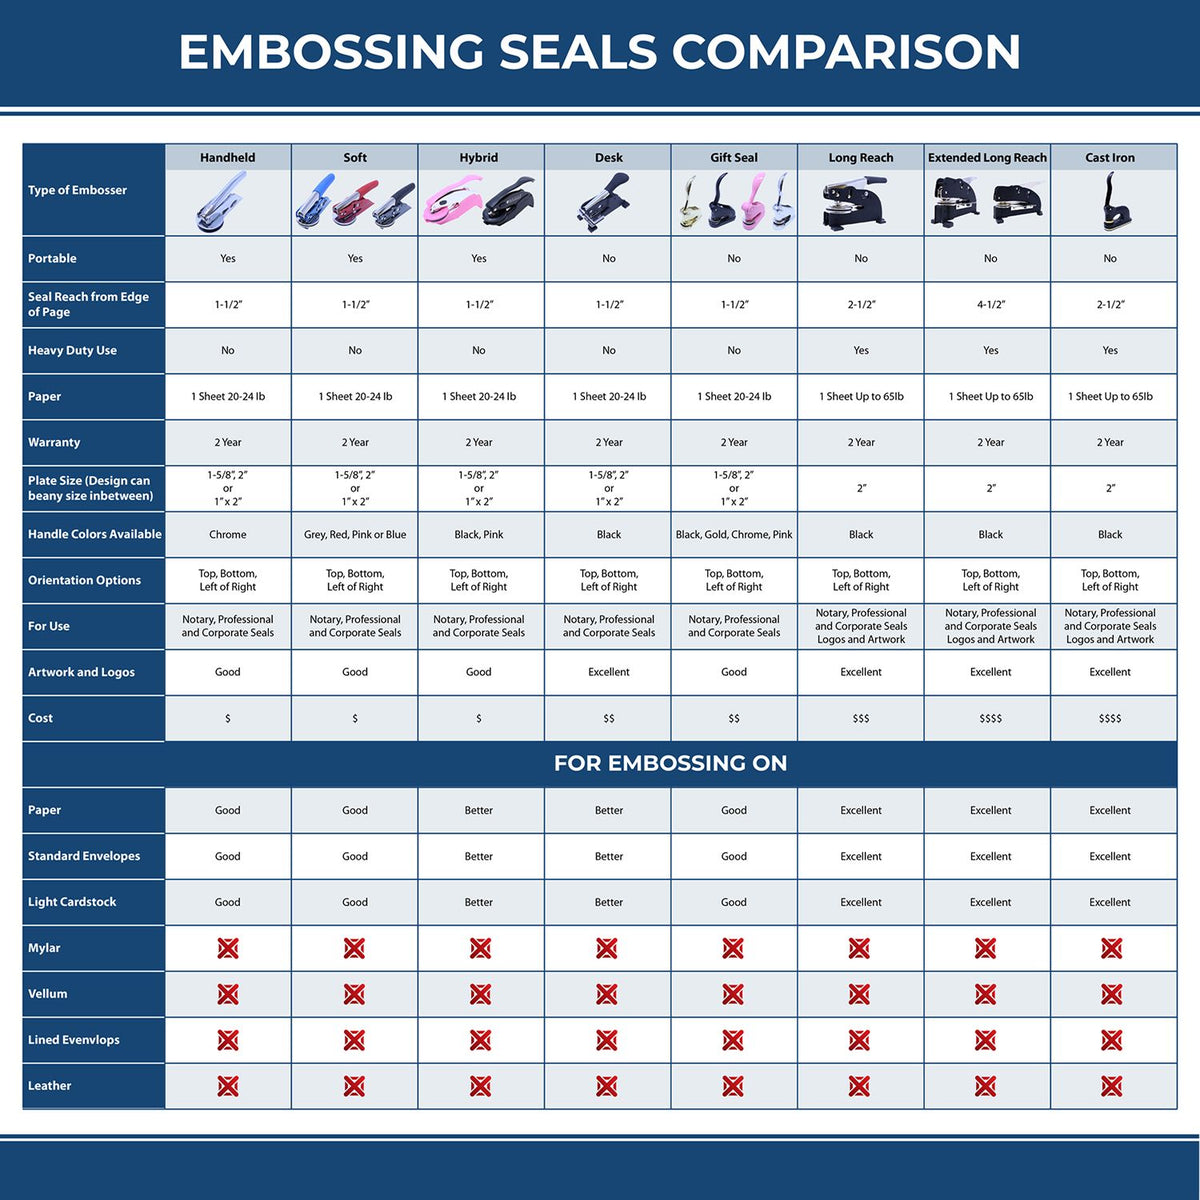 A comparison chart for the different types of mount models available for the Heavy Duty Cast Iron New Hampshire Architect Embosser.